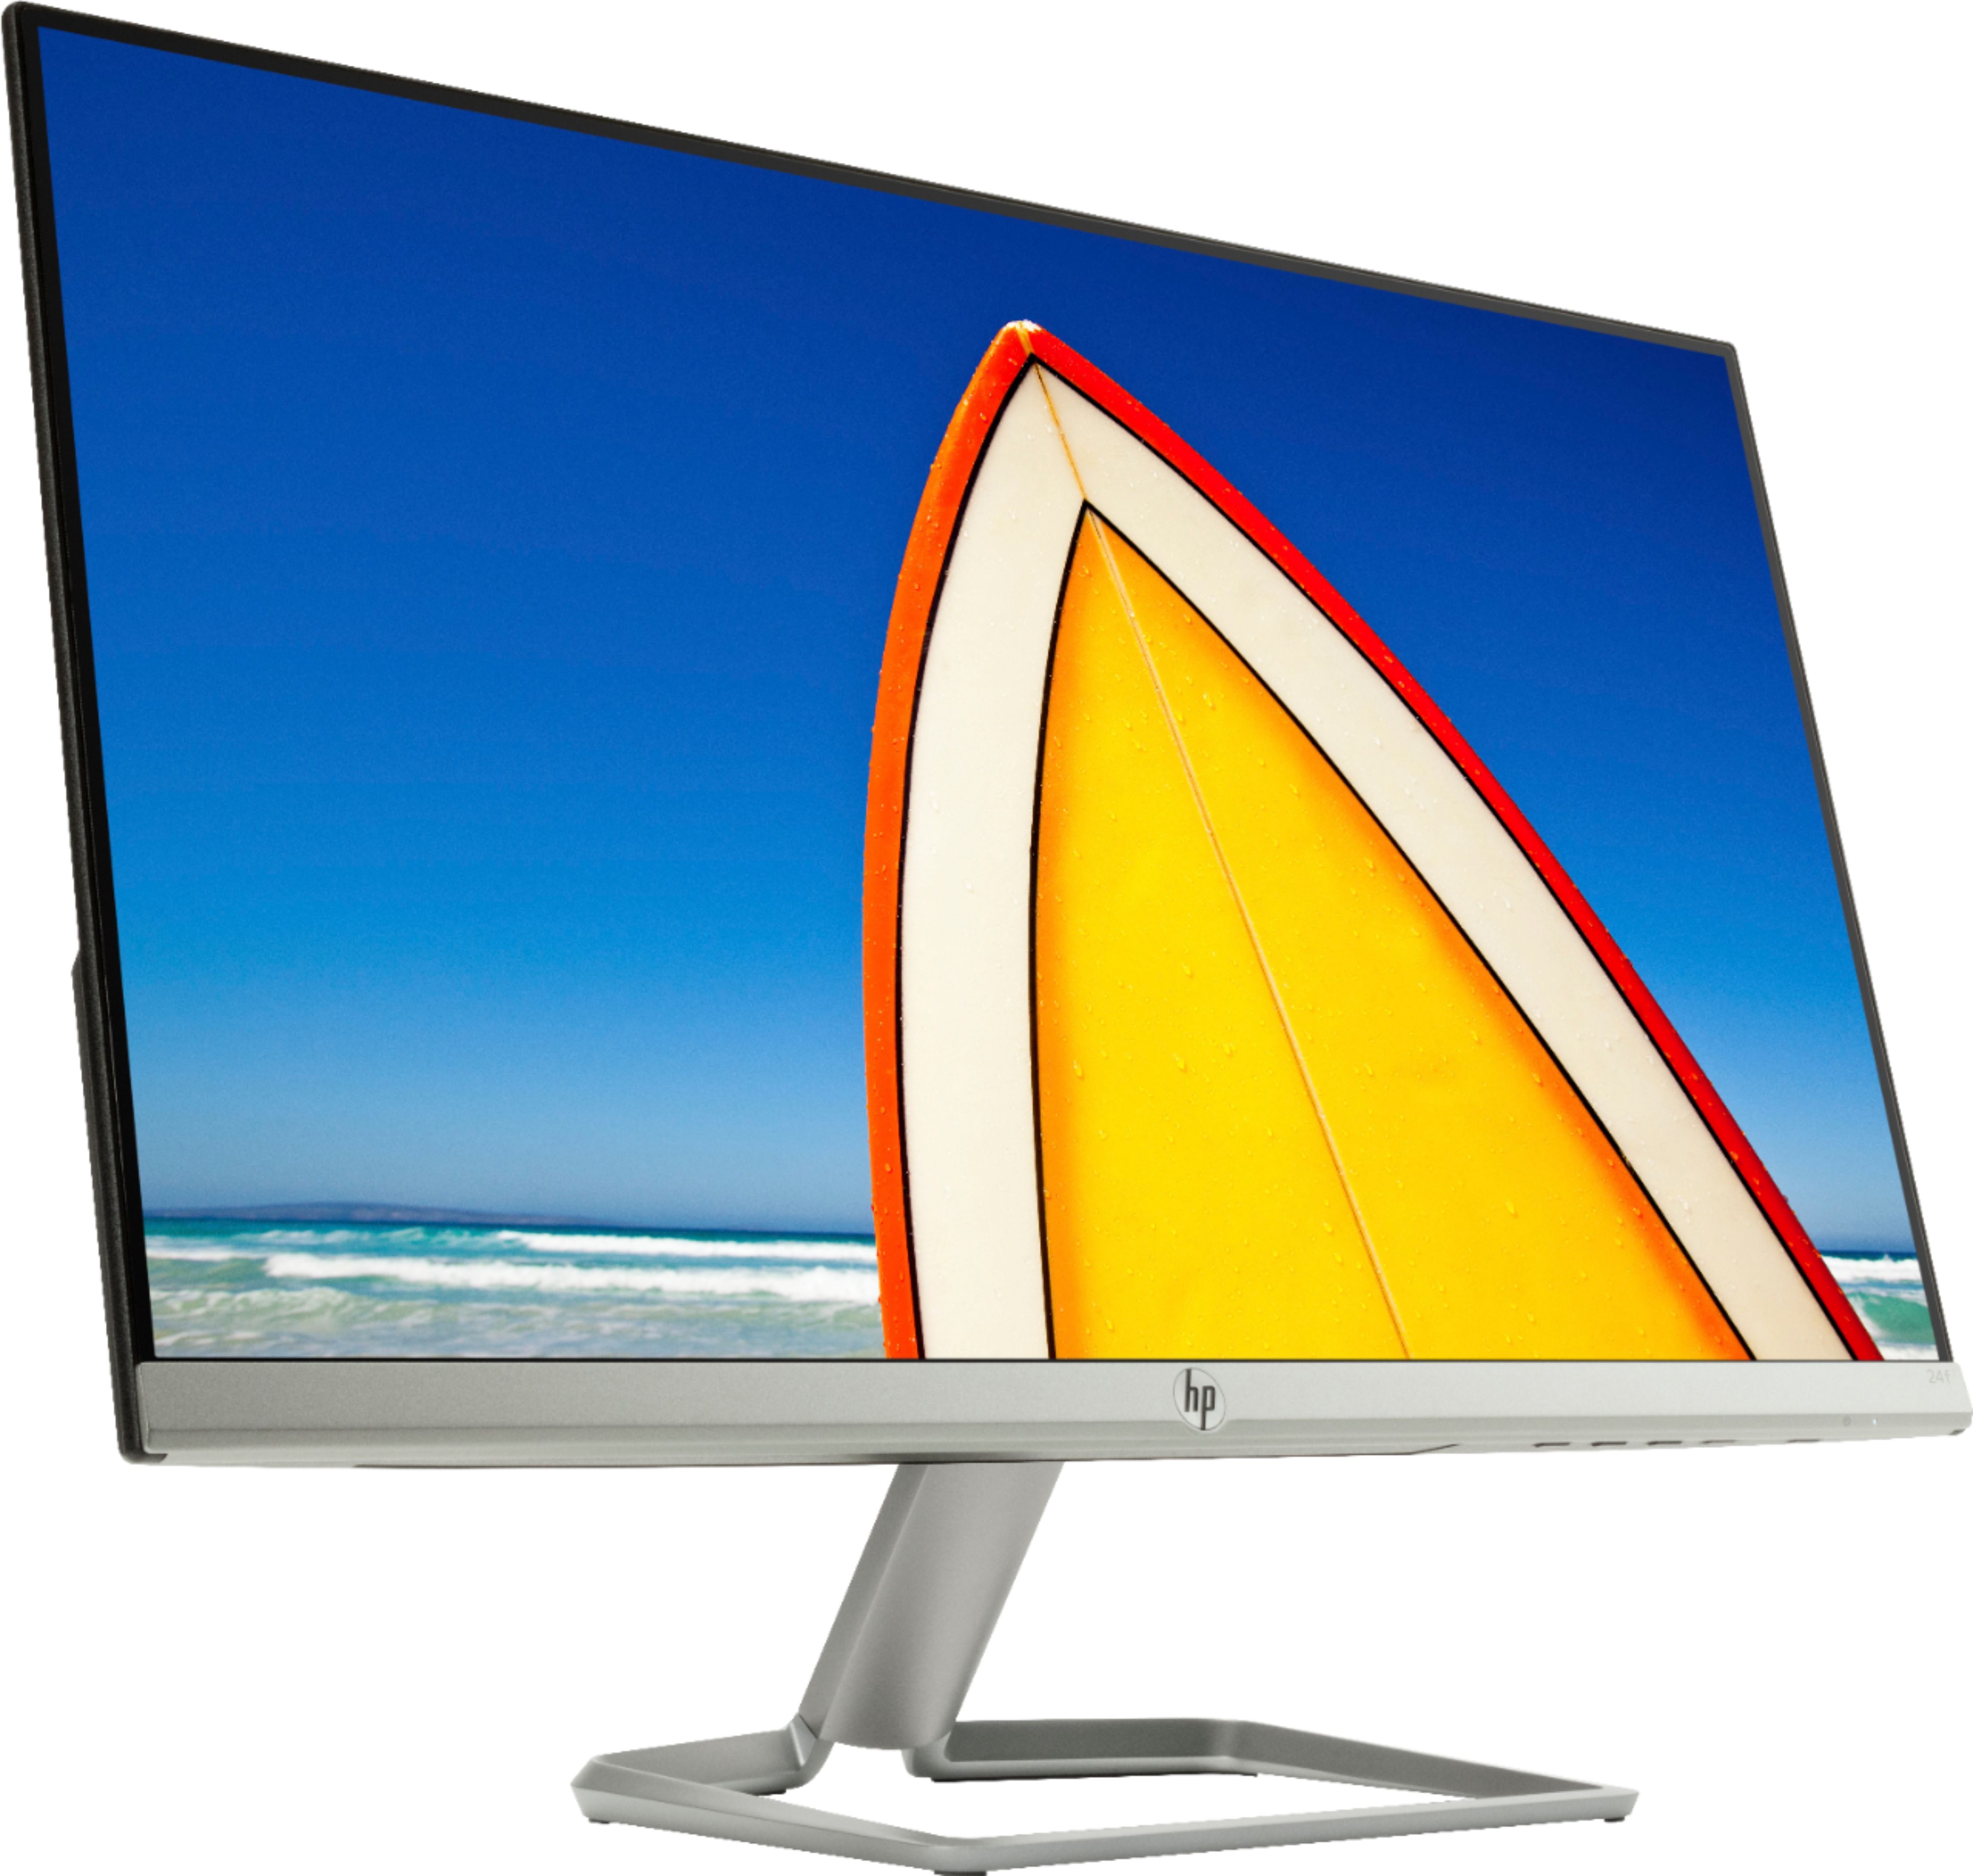 Angle View: HP - Geek Squad Certified Refurbished 23.8" IPS LED FHD FreeSync Monitor - Natural Silver